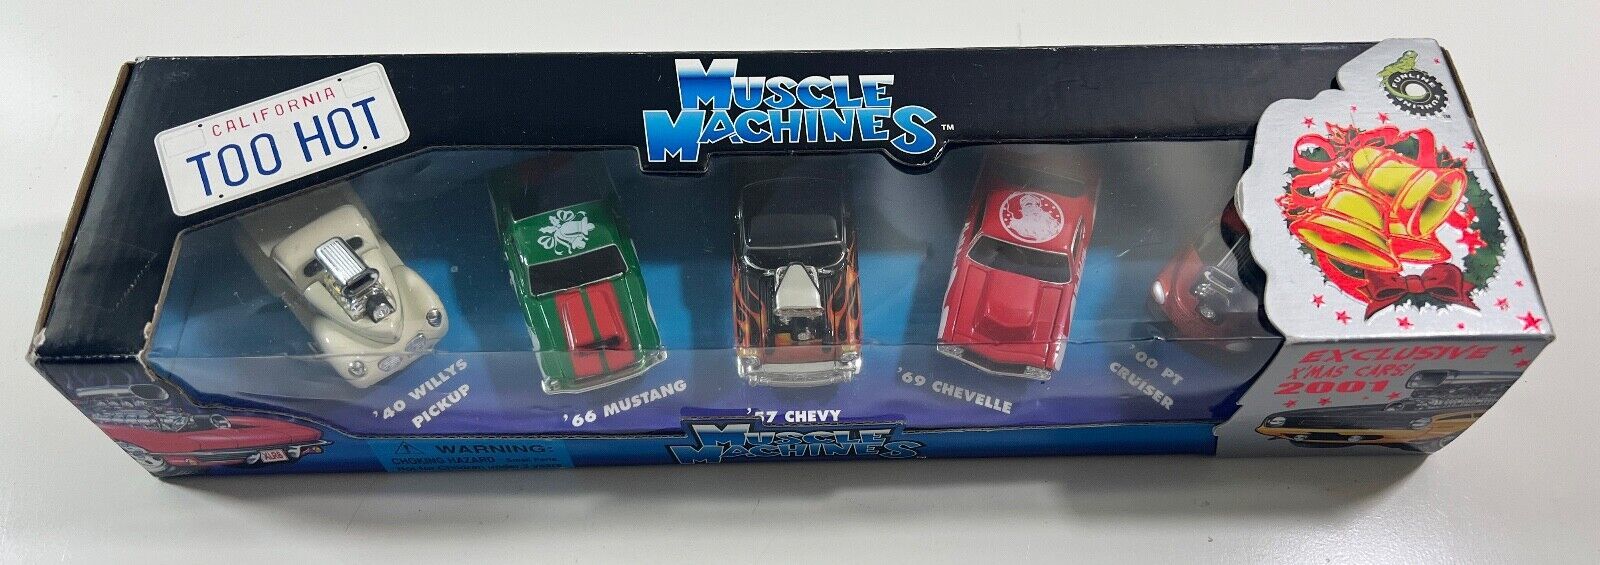 Muscle Machines 1:64 Scale California Too Hot • 5 Pack 2001 X'MAS CARS EXCLUSIVE - $19.25